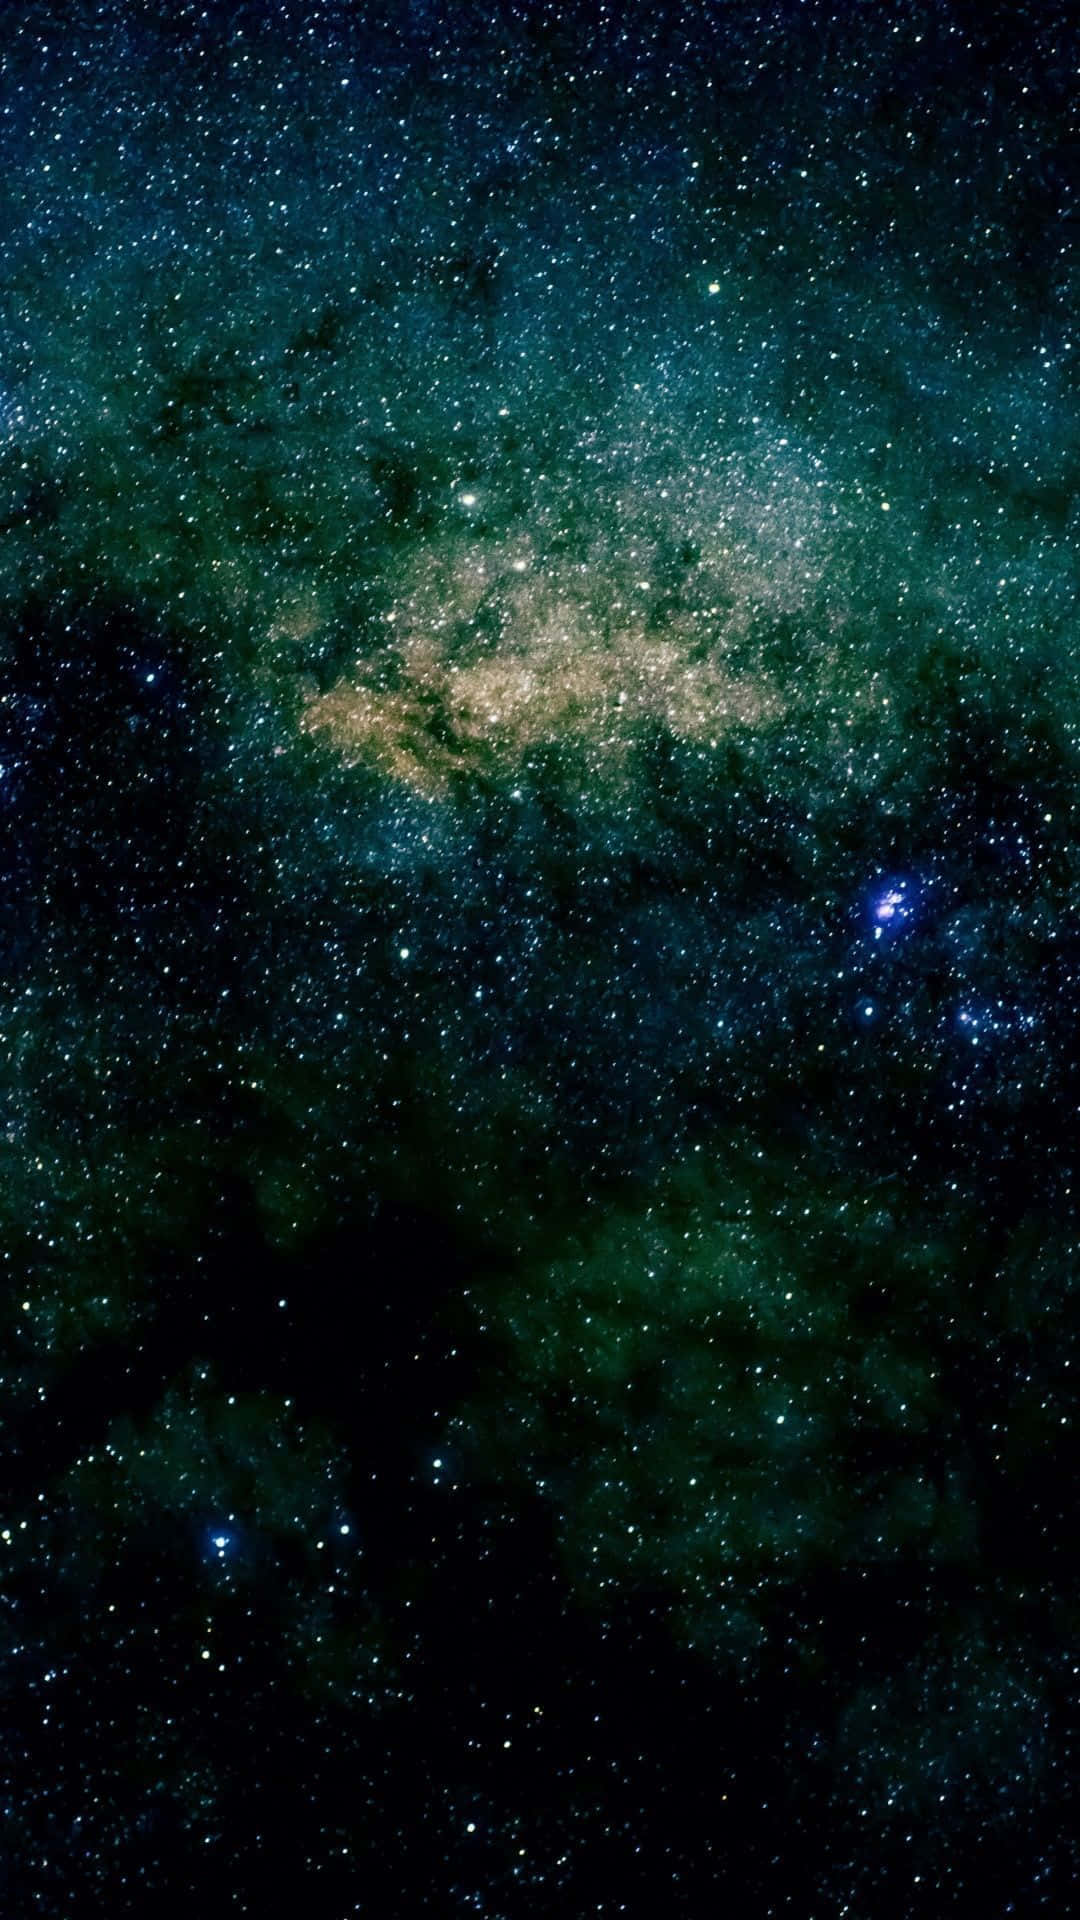 "Exploring the mysteries of the Green and Blue Galaxy" Wallpaper